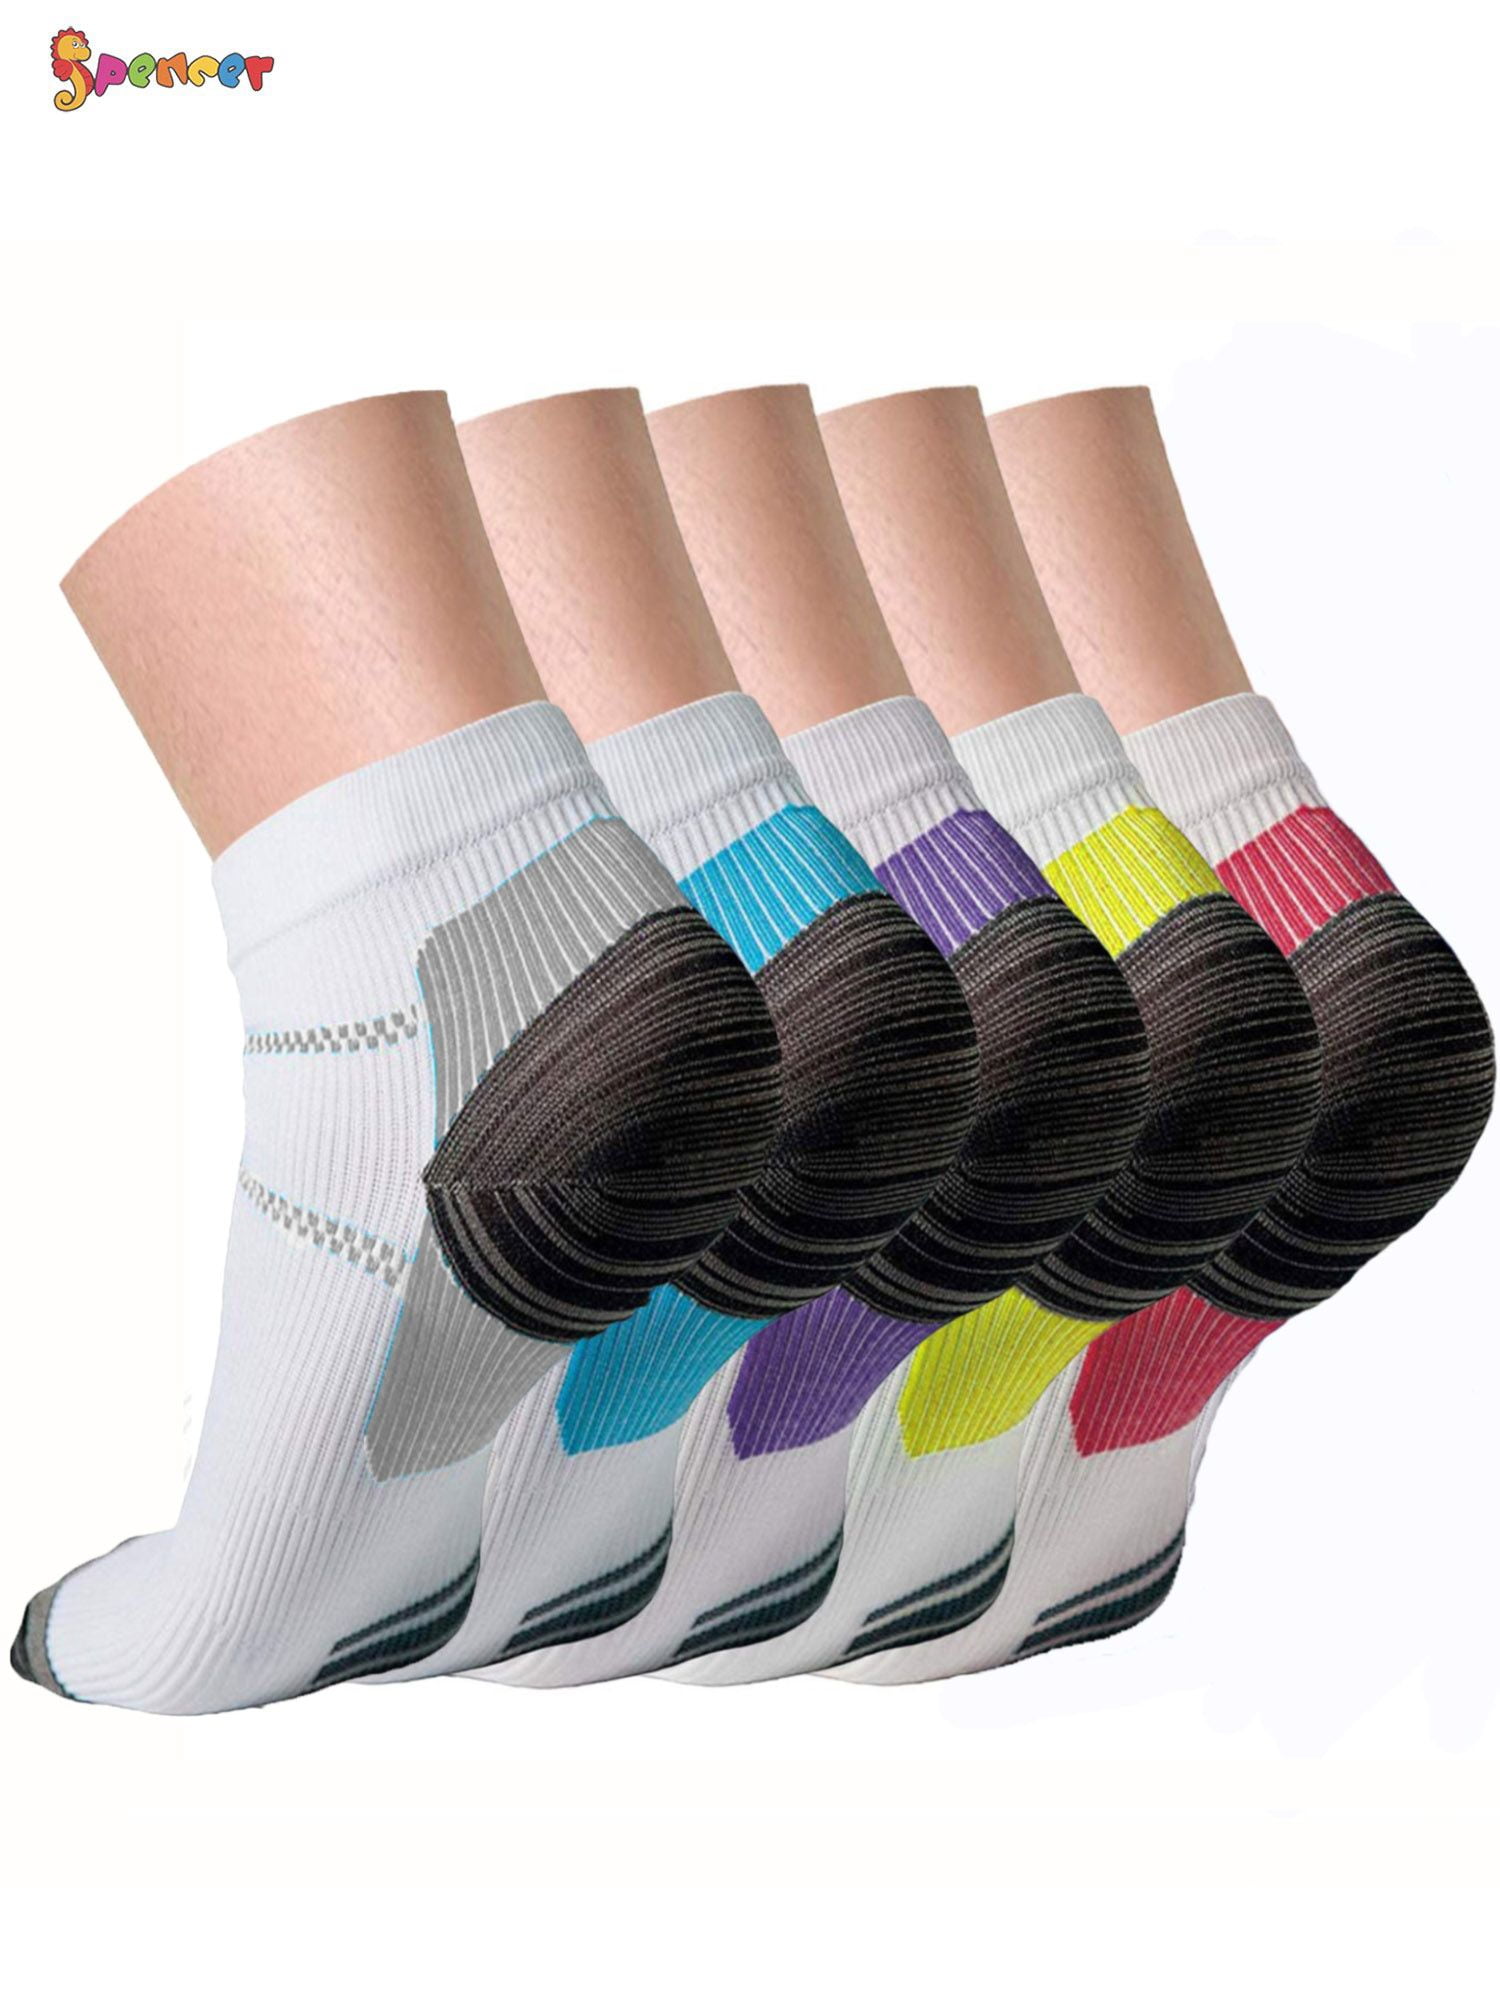 Busy Socks Low Cut Arch Support Tab Athletic Socks 3 Pairs Compression Ankle Cushioned Running Sport Socks for Men Women 